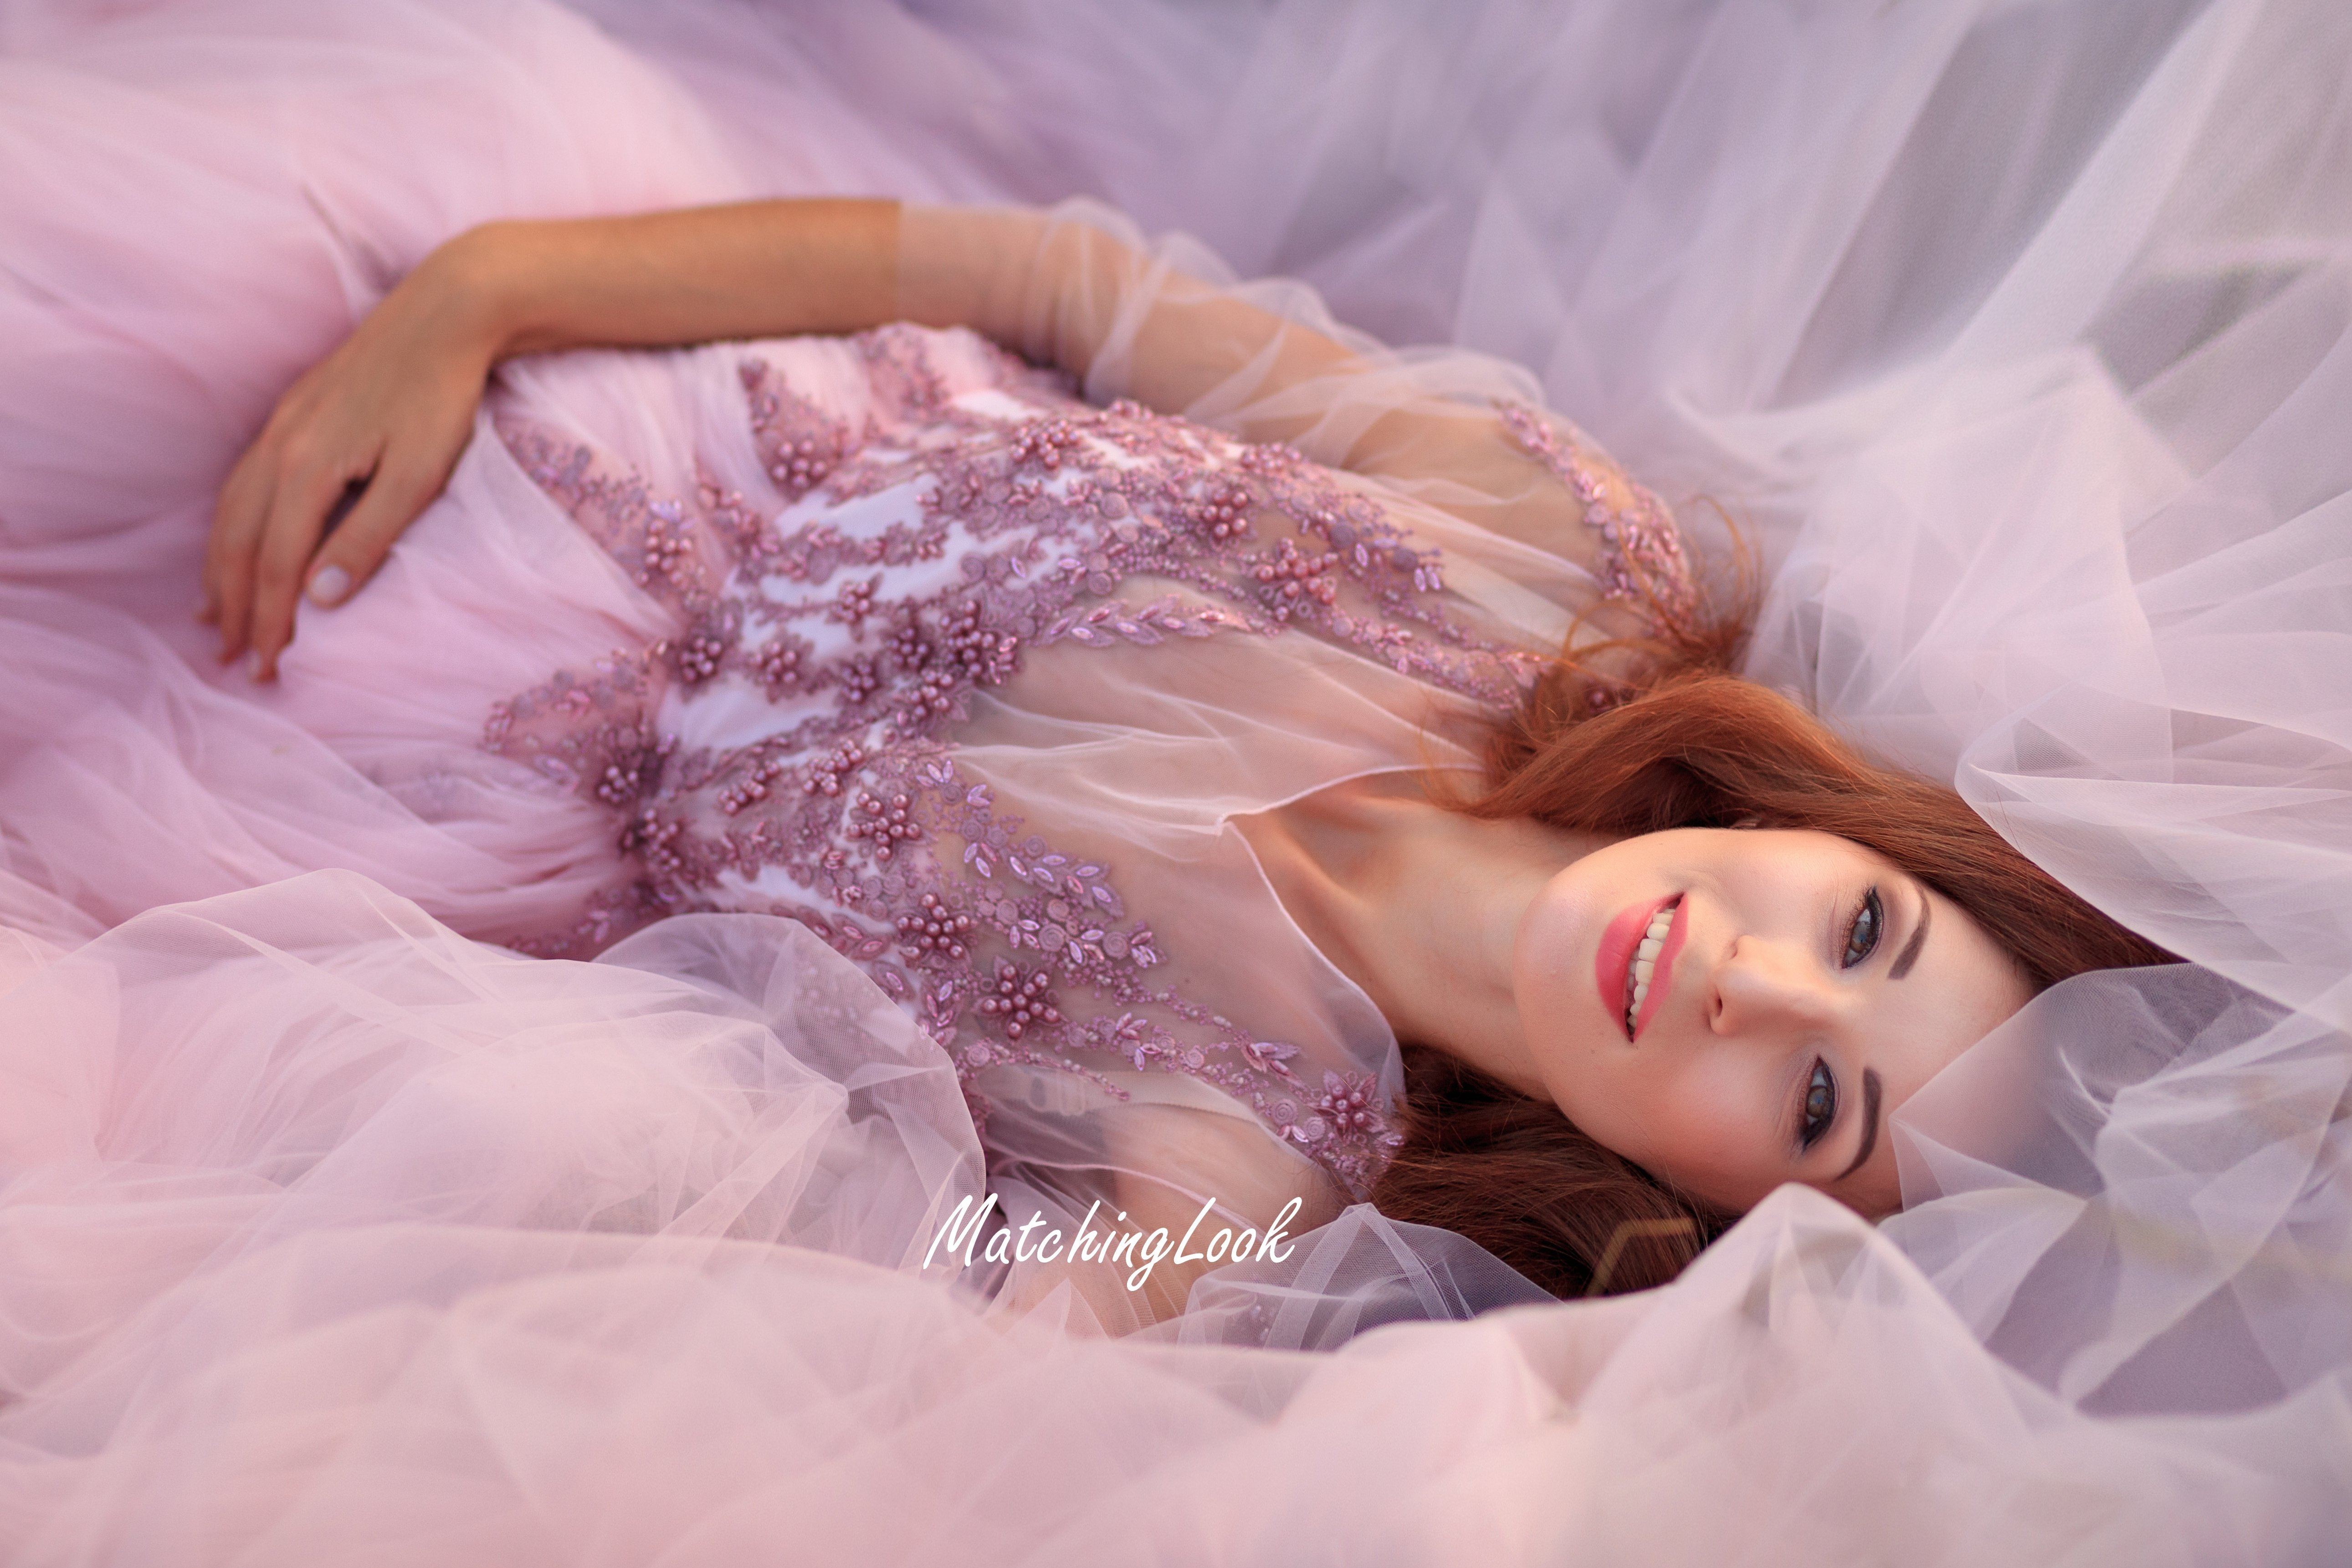 Matchinglook Pink Maternity Robe, Frilled Maternity Gown, Pink Tulle Robe, Maternity Photoshoot Robe, Boudoir Tulle Dress, Sheer Ruffle Gown Robe Cream / One Size